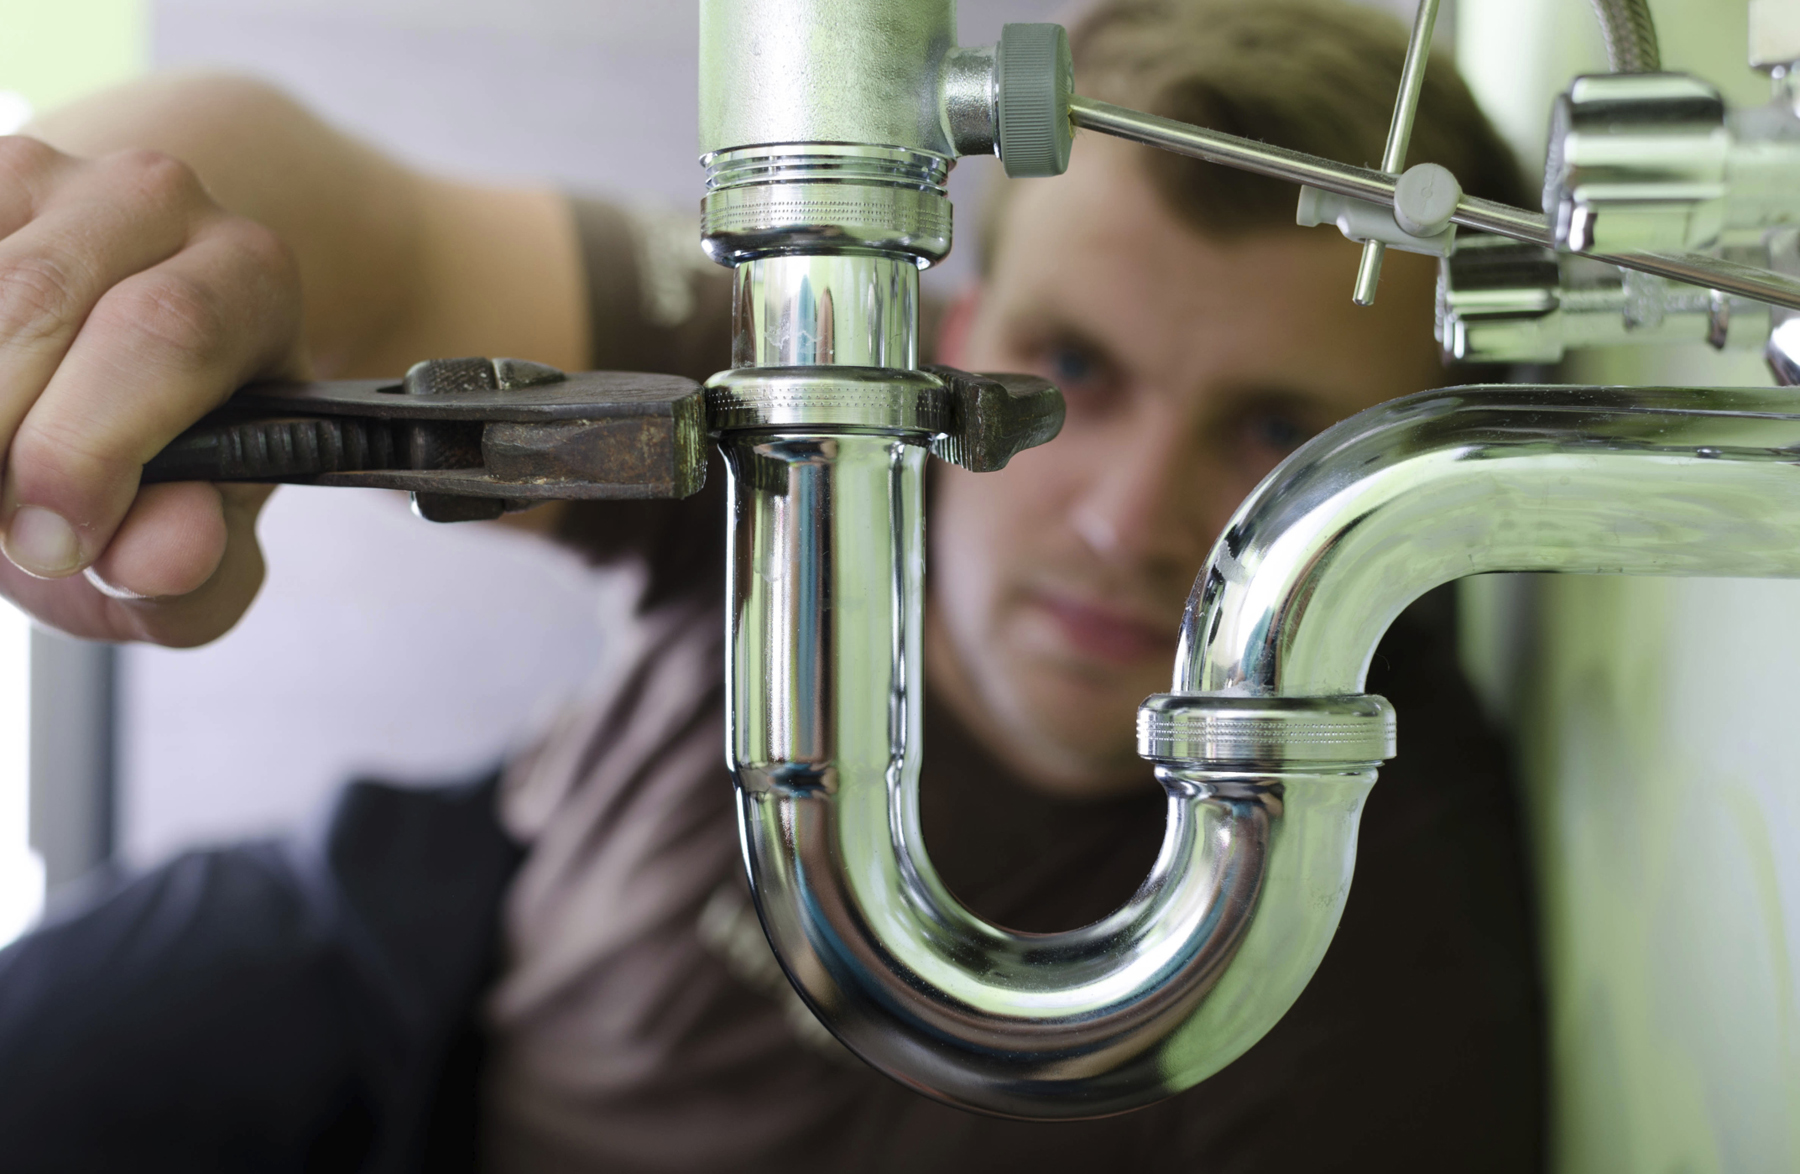 Adelaide Burst Pipe? Minimise Water Damage With These Useful Tips - ABA Plumbing & Gas